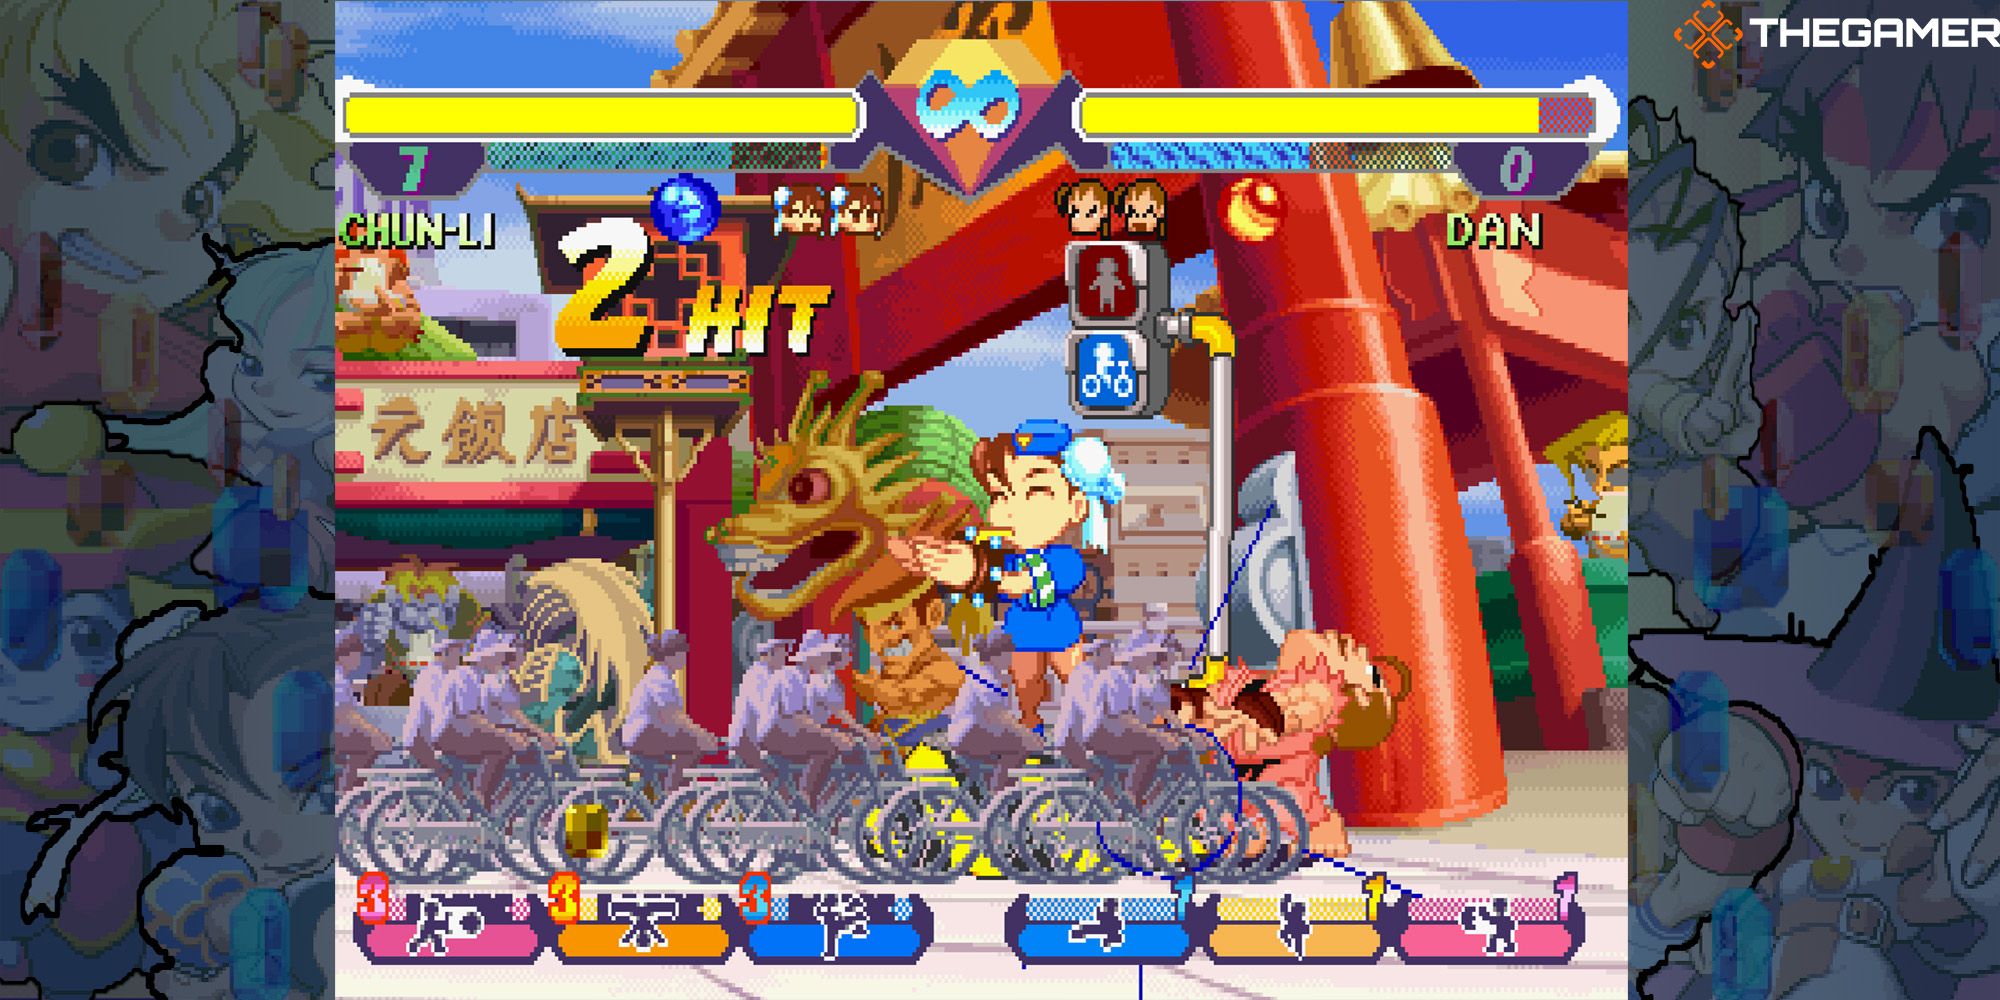 Chun-li directs a mob of cyclists towards Dan in a battle at Gen's Restaurant. Pocket Fighter.